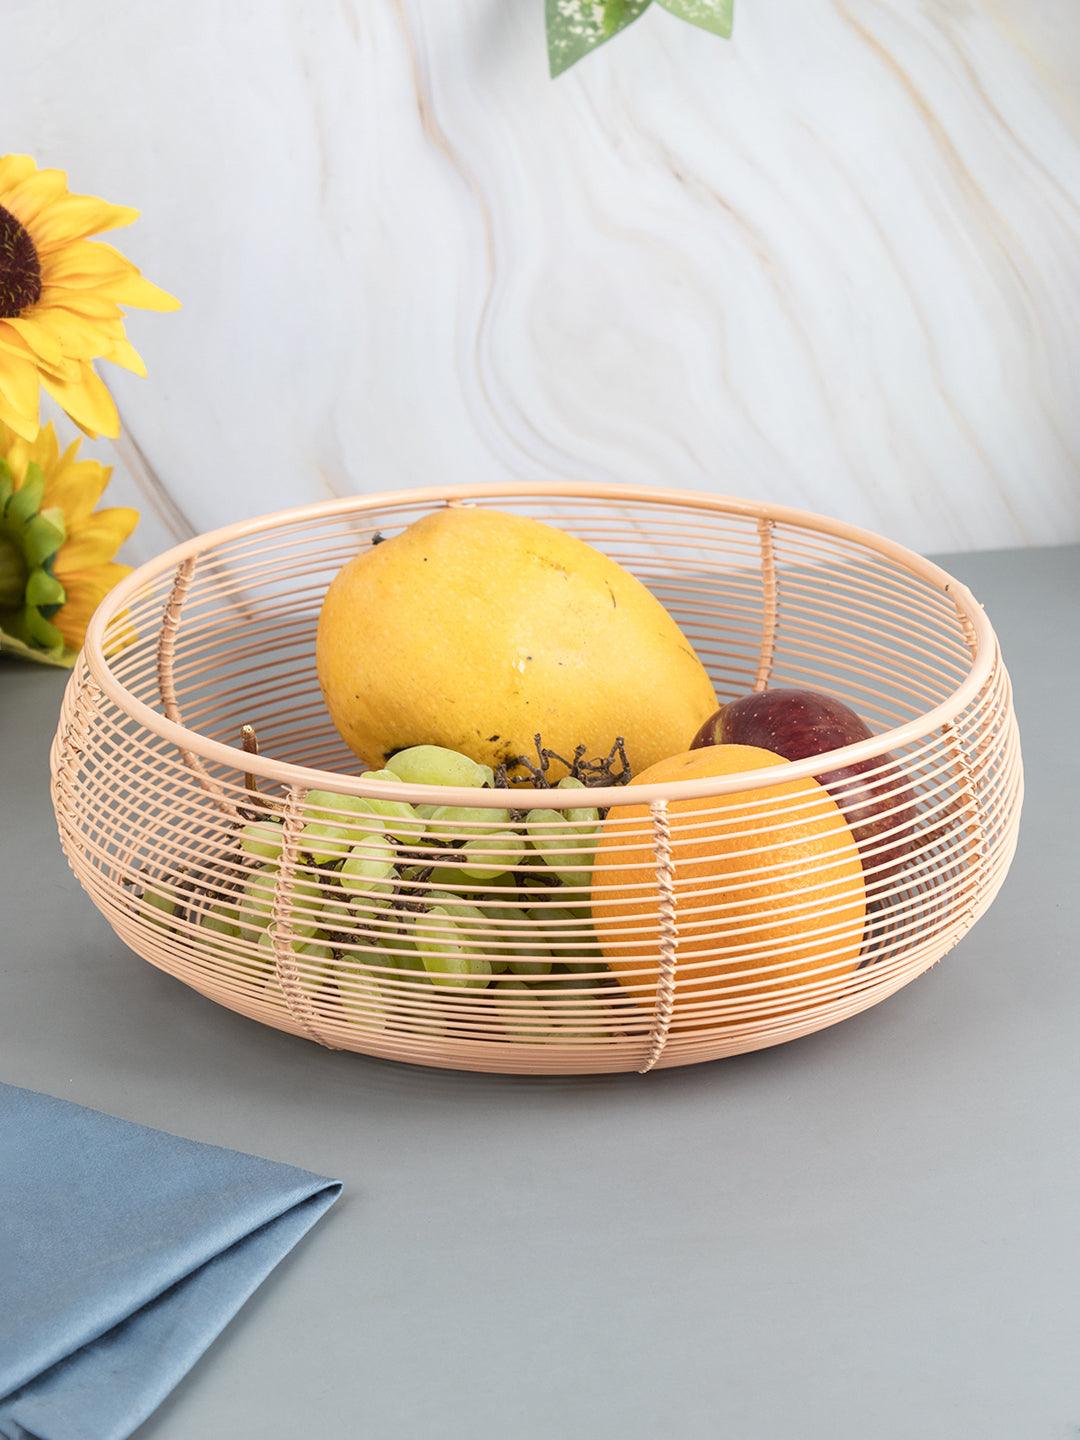 https://cdn.shopify.com/s/files/1/0267/1699/5754/files/market99-metal-wire-countertop-fruit-bowl-basket-holder-stand-for-home-and-kitchen-peach-colour-iron-fruit-basket-1-29021077438634.jpg?v=1697004639&width=1080